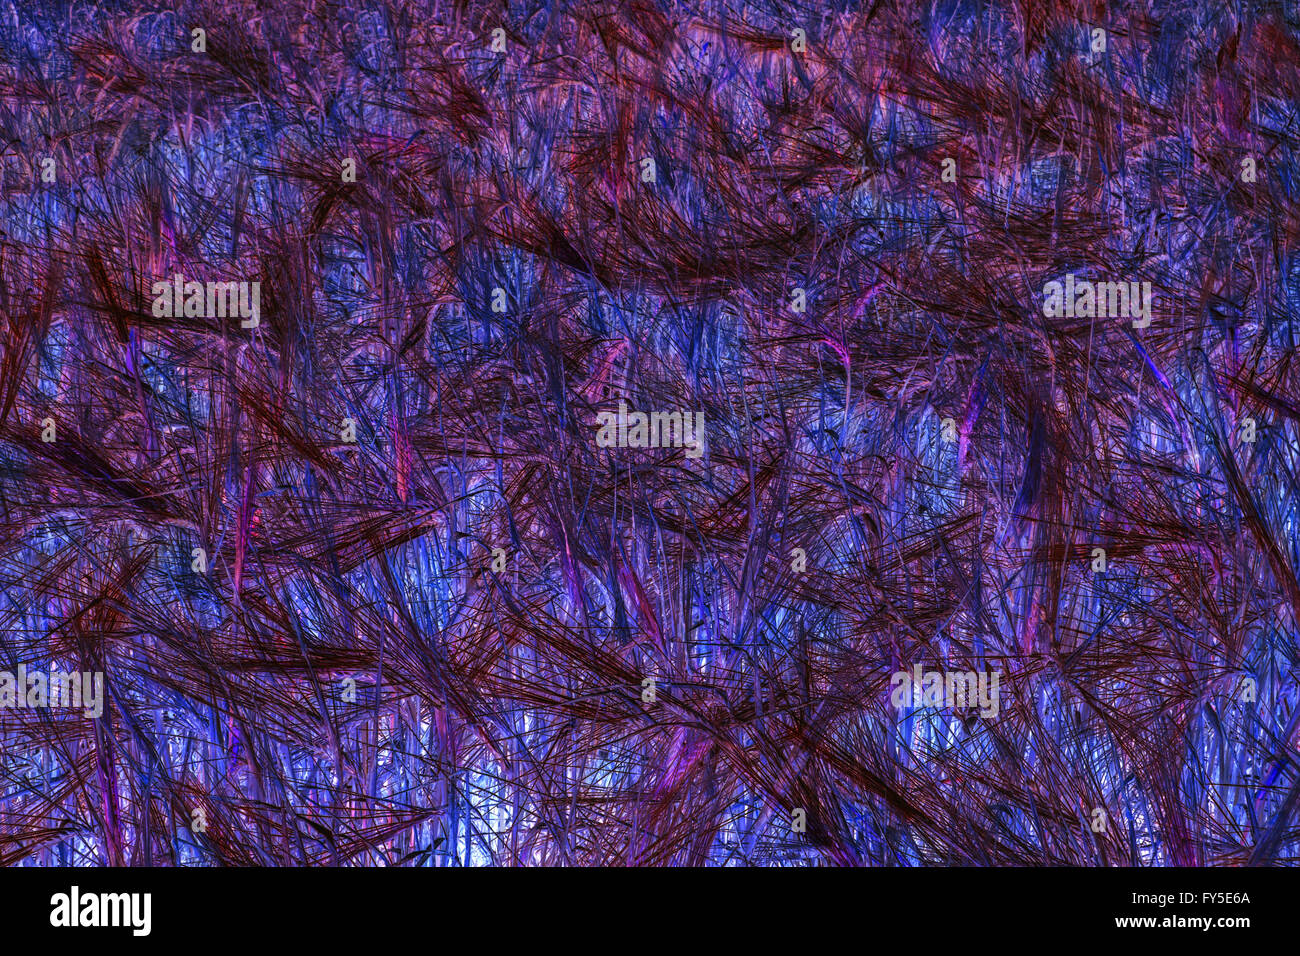 Abstract texture of dyed barley Stock Photo